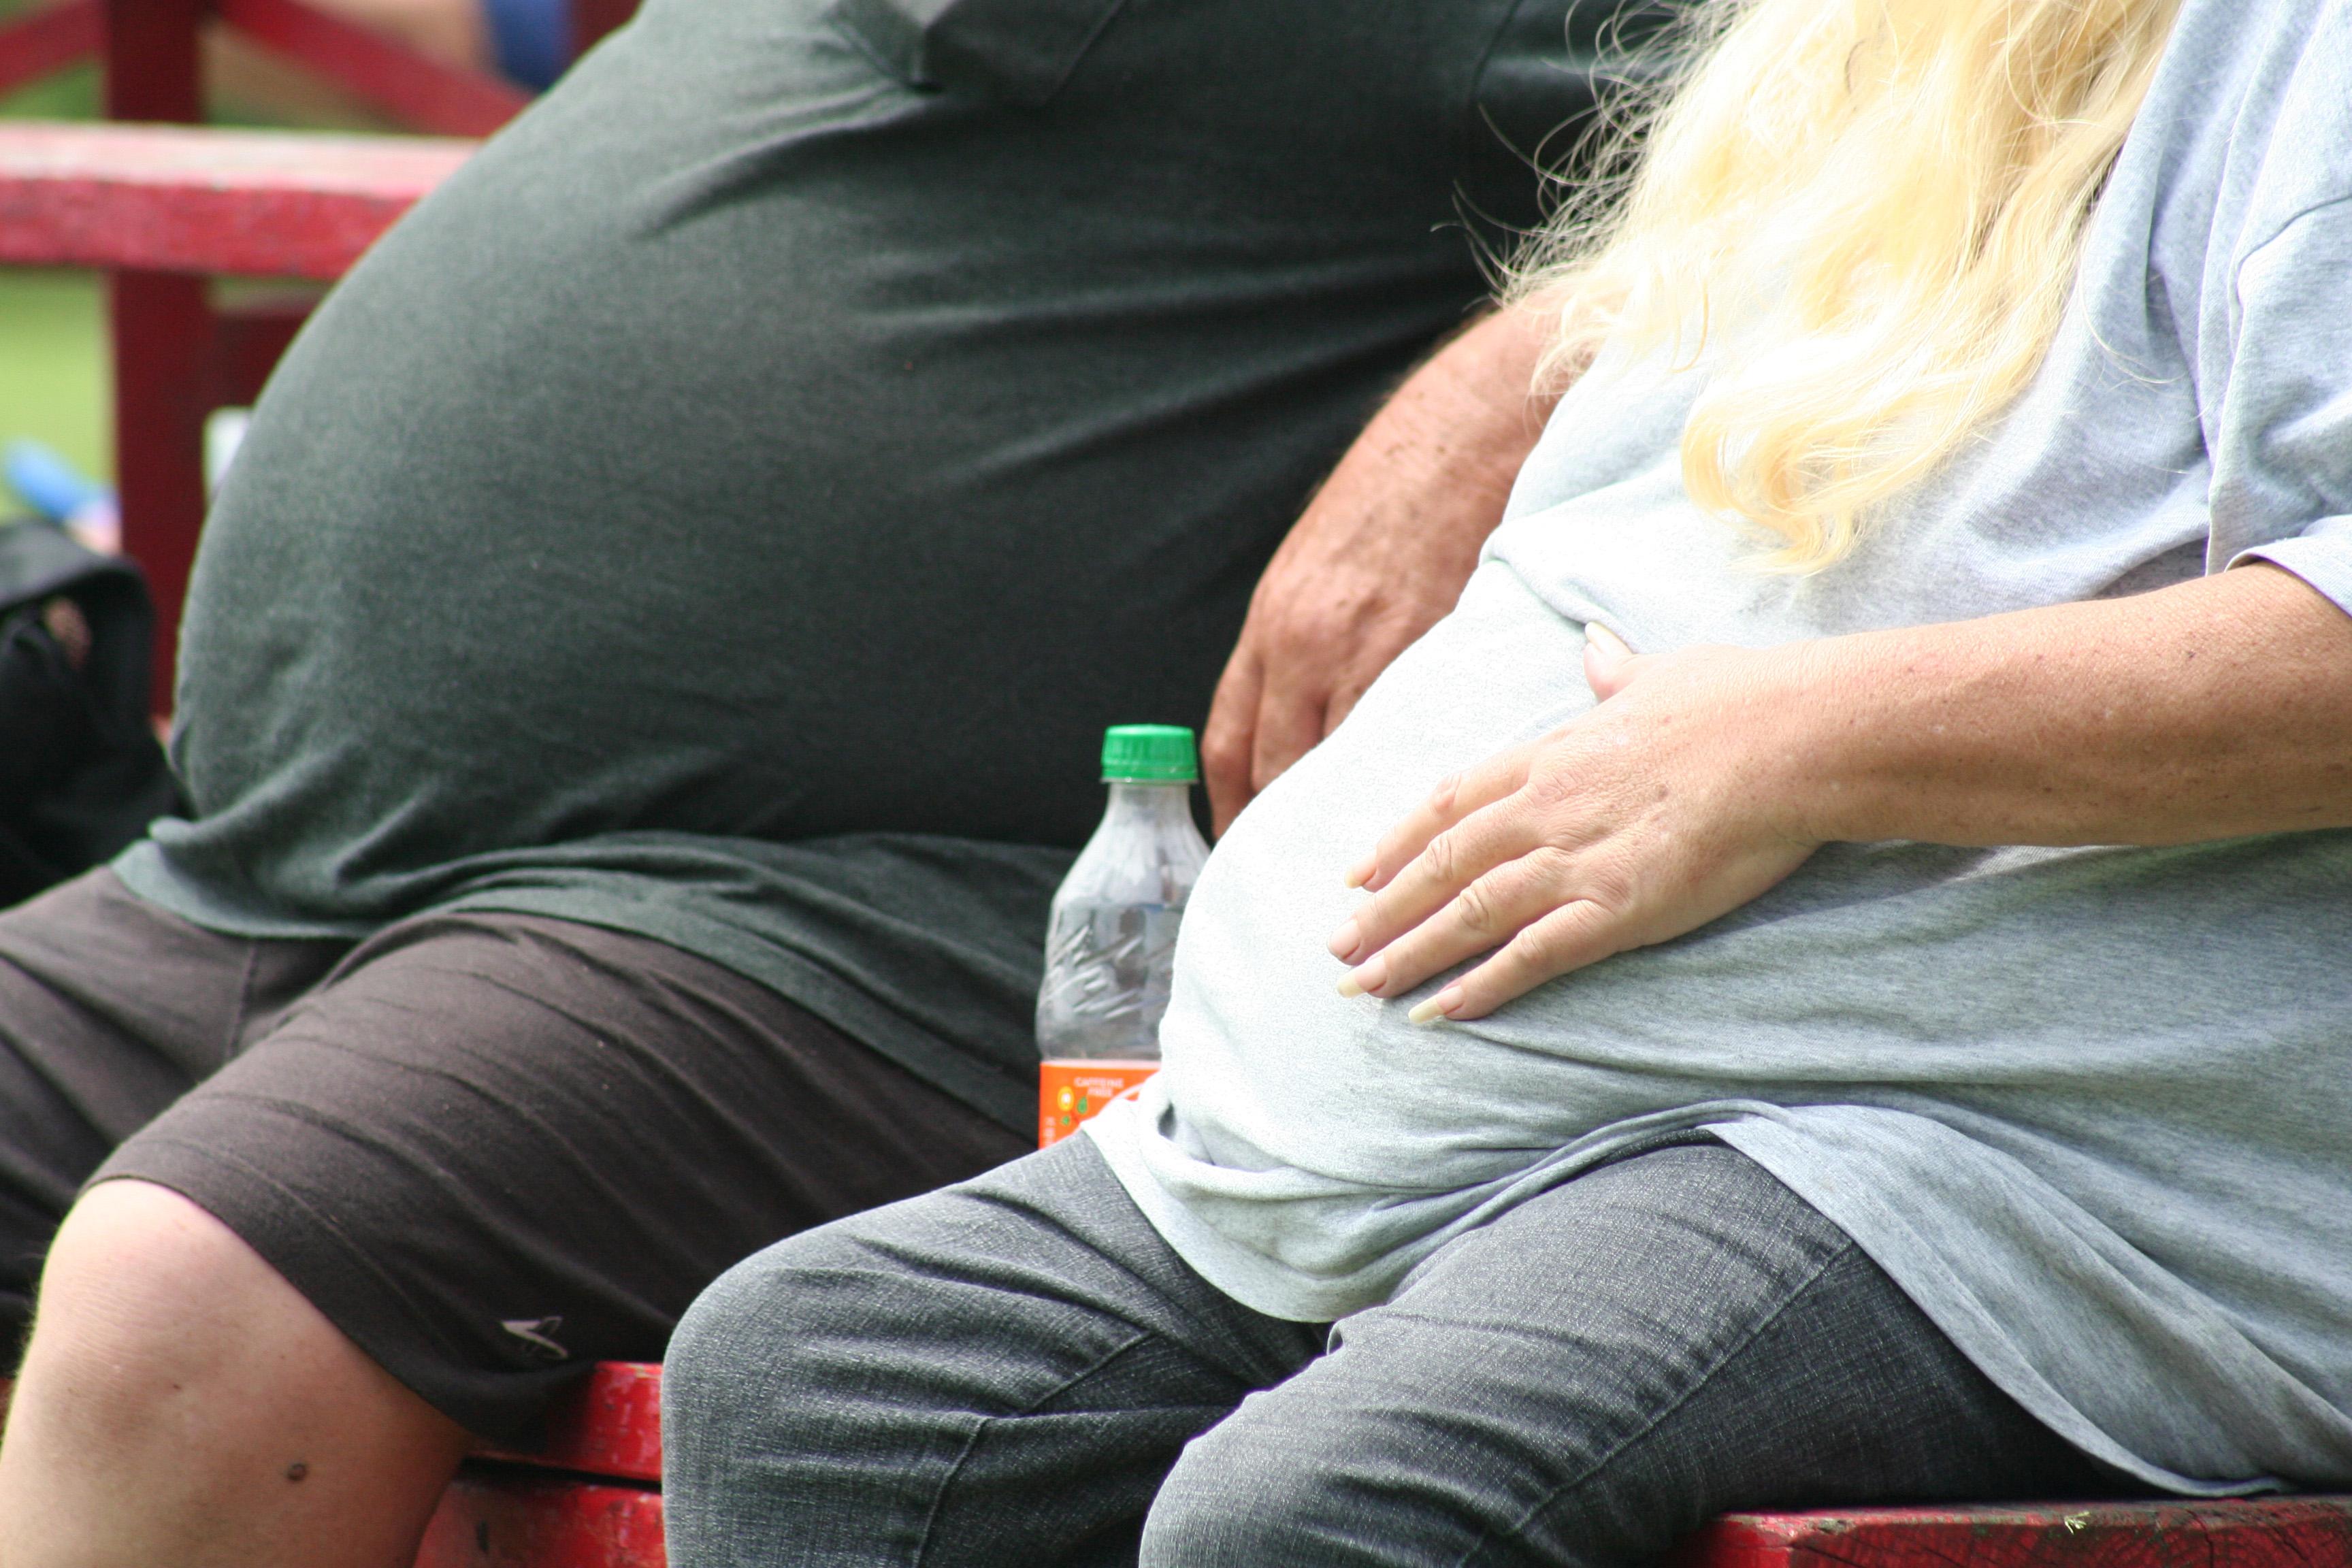 Chronic diseases, like obesity, are among the costly and preventable, according to the Chicago Public Health Department. (Tony Alter / Flickr)